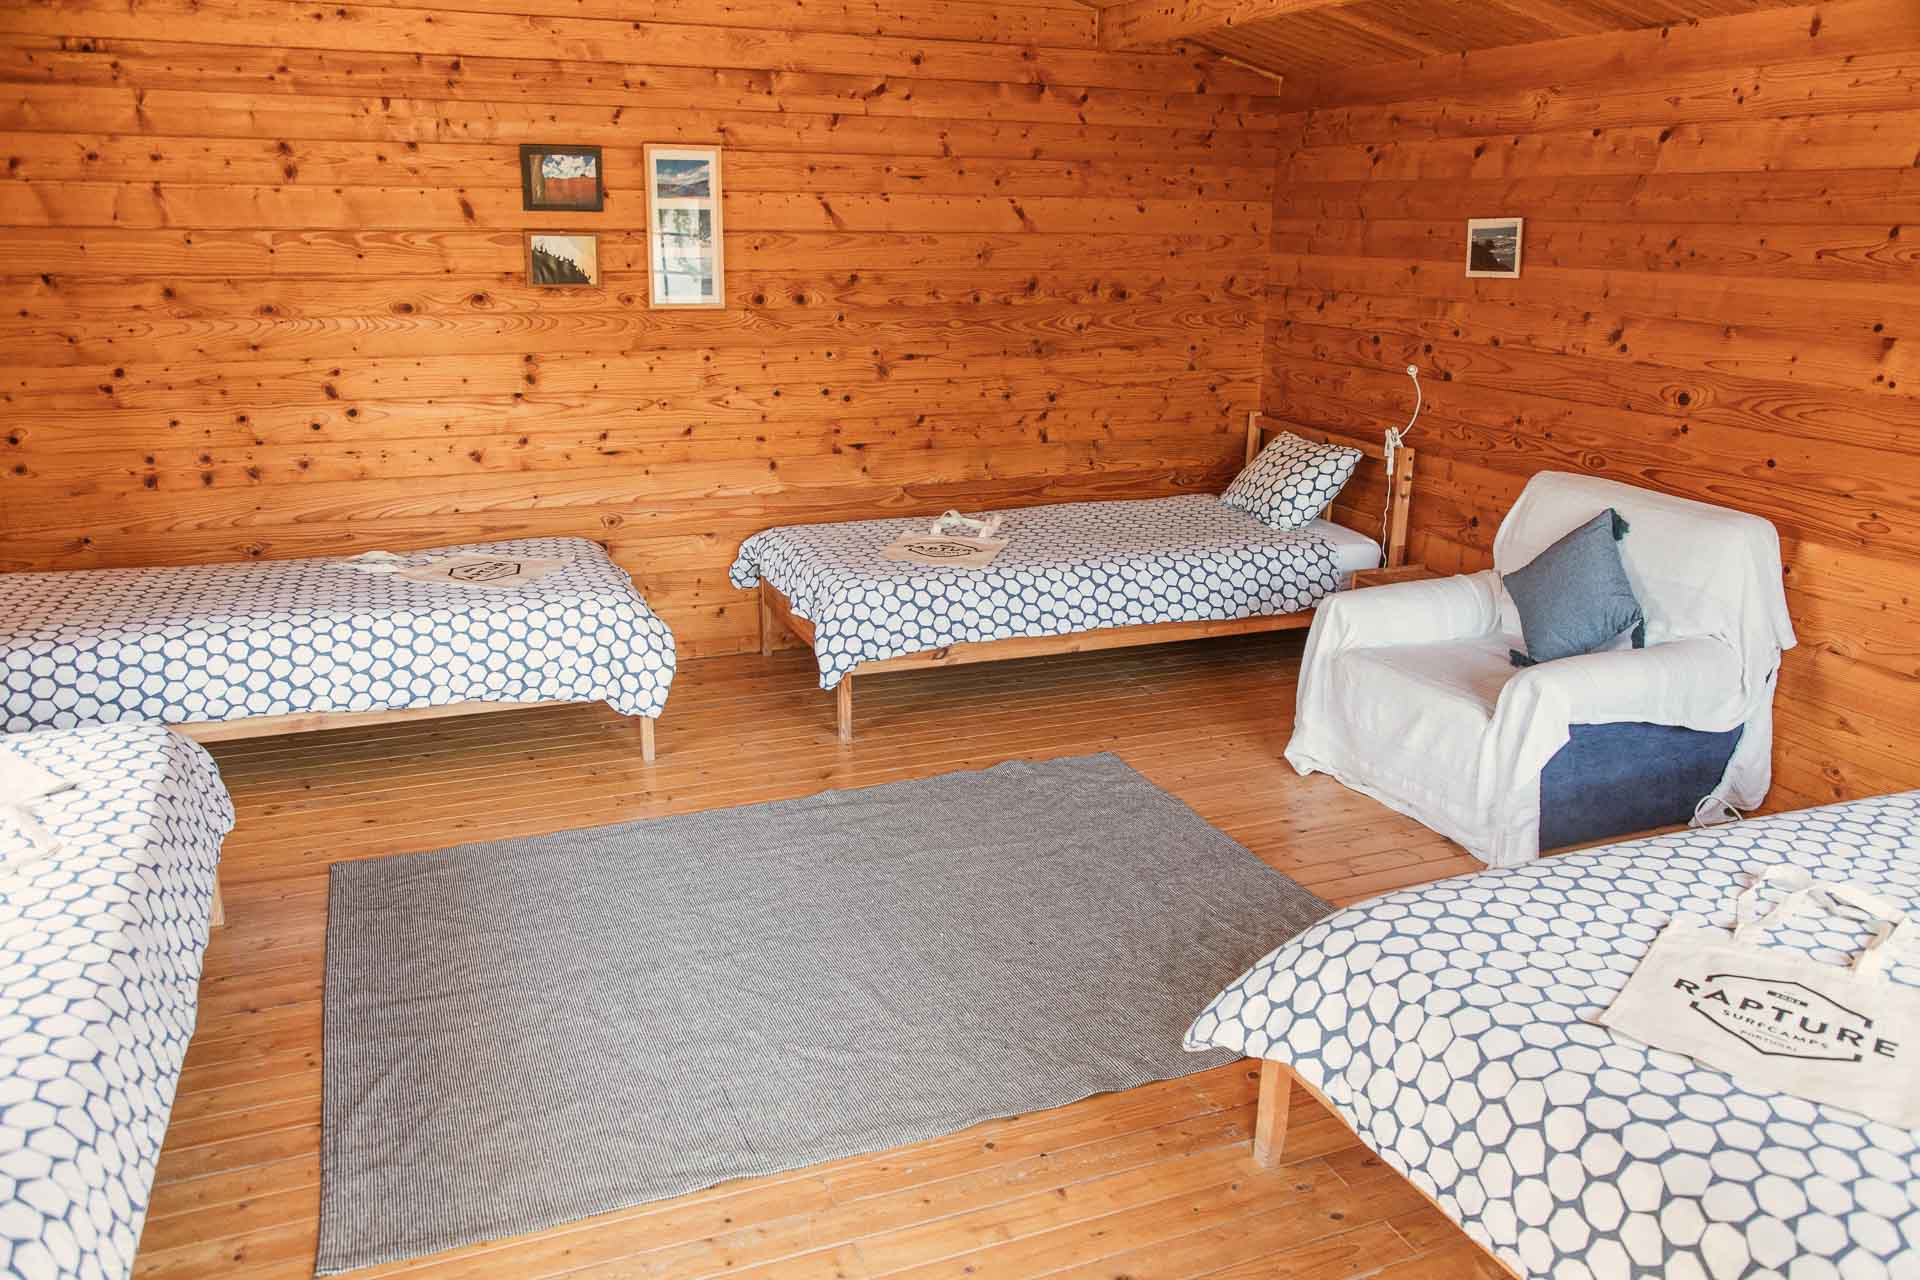 4 single beds and a sofa in a shared room of a rustic surfcamp